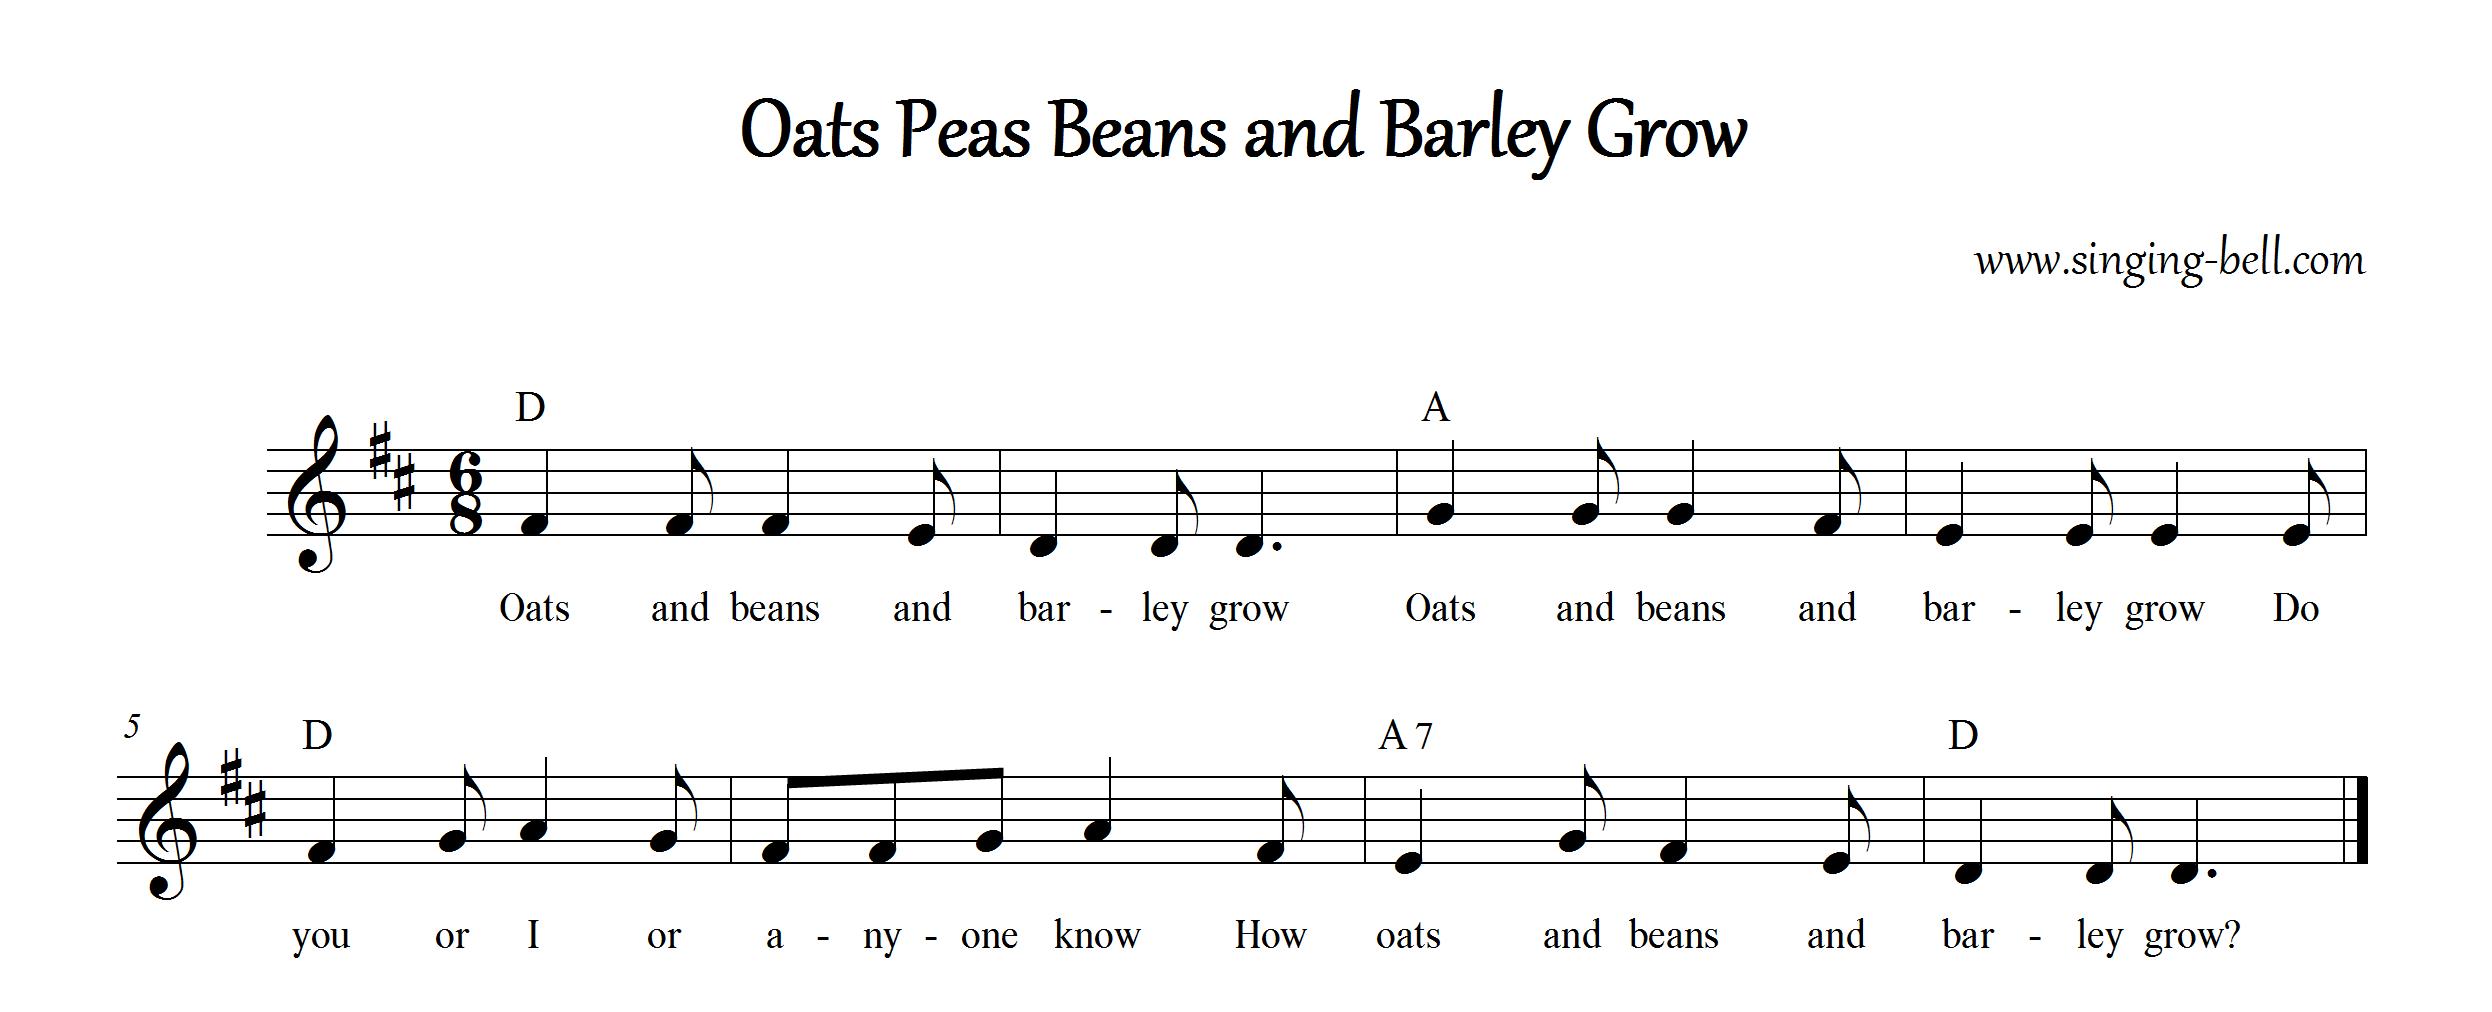 oats-peas-beans-and-barley-grow_d_score_singing-bell